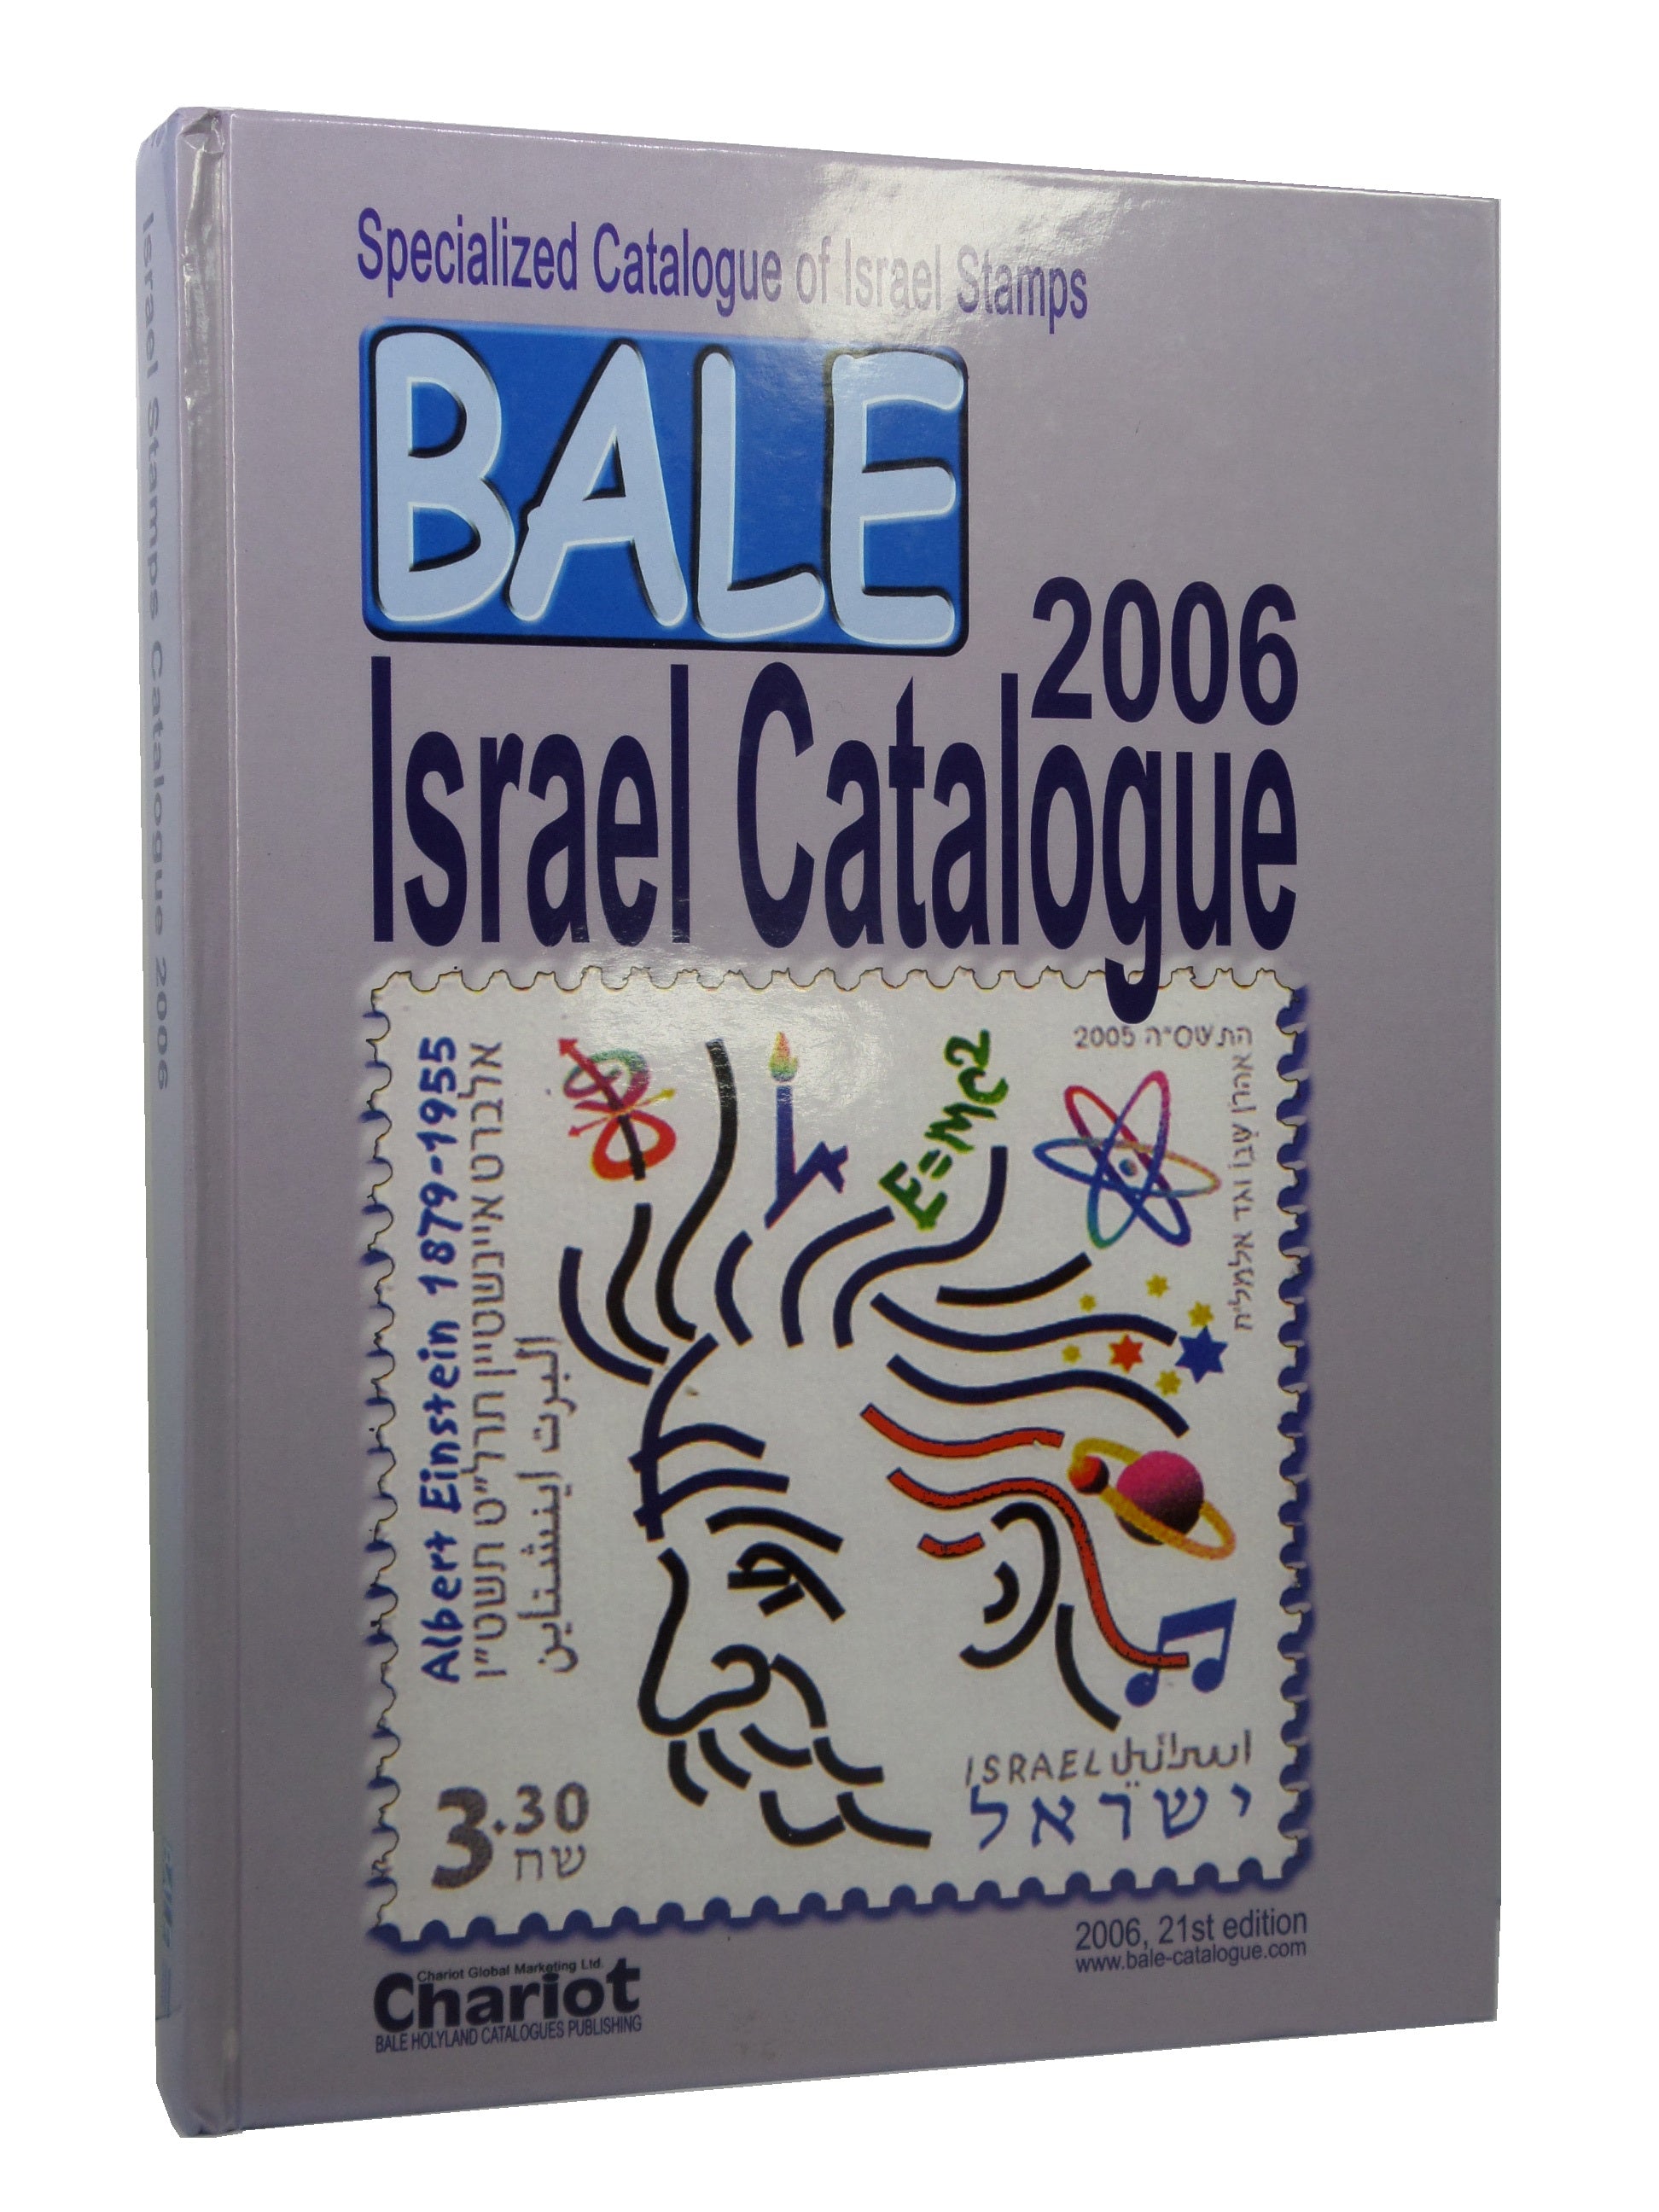 BALE SPECIALIZED CATALOGUE OF ISRAEL POSTAGE STAMPS 1948-2006 HARDCOVER